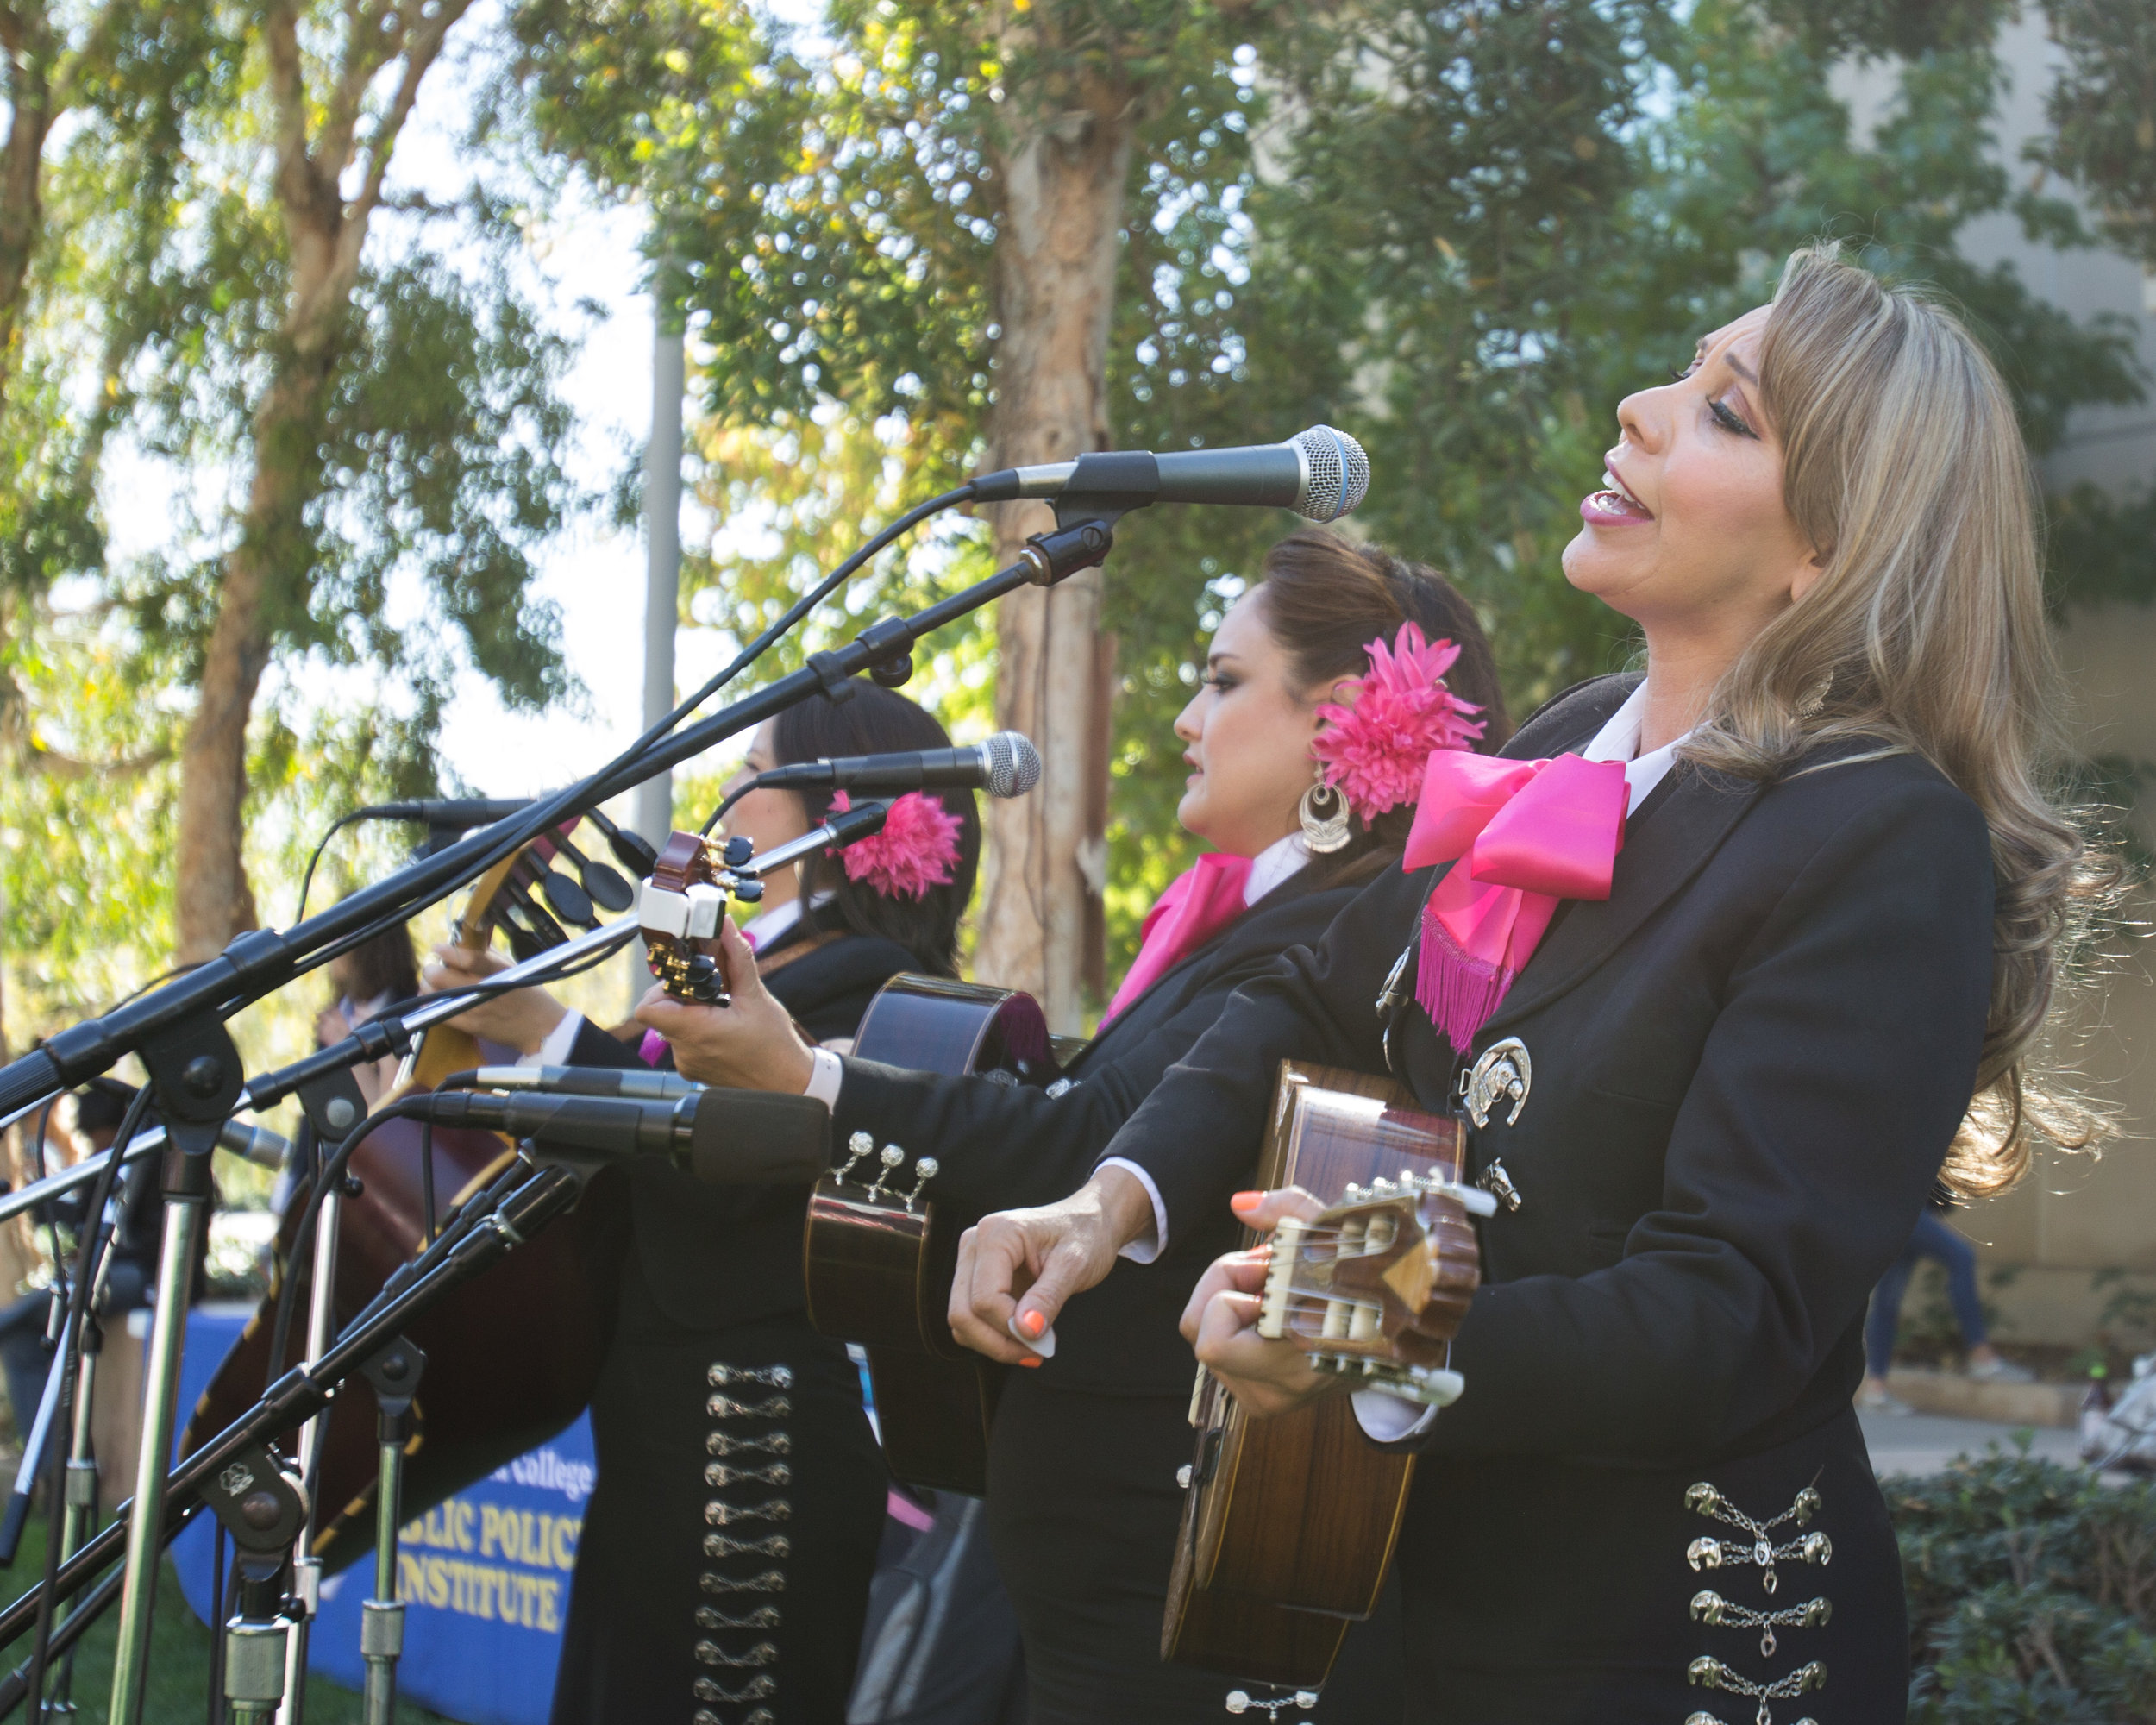  Mariachi band "Corazon De Mexico" performing cover of the song "El Rey" by Vicente Fernandez outside the quad area located at  Santa Monica College in Santa Monica California on Tuesday November 13th, 2018. (Jacob Victorica/ Corsair Photo) 